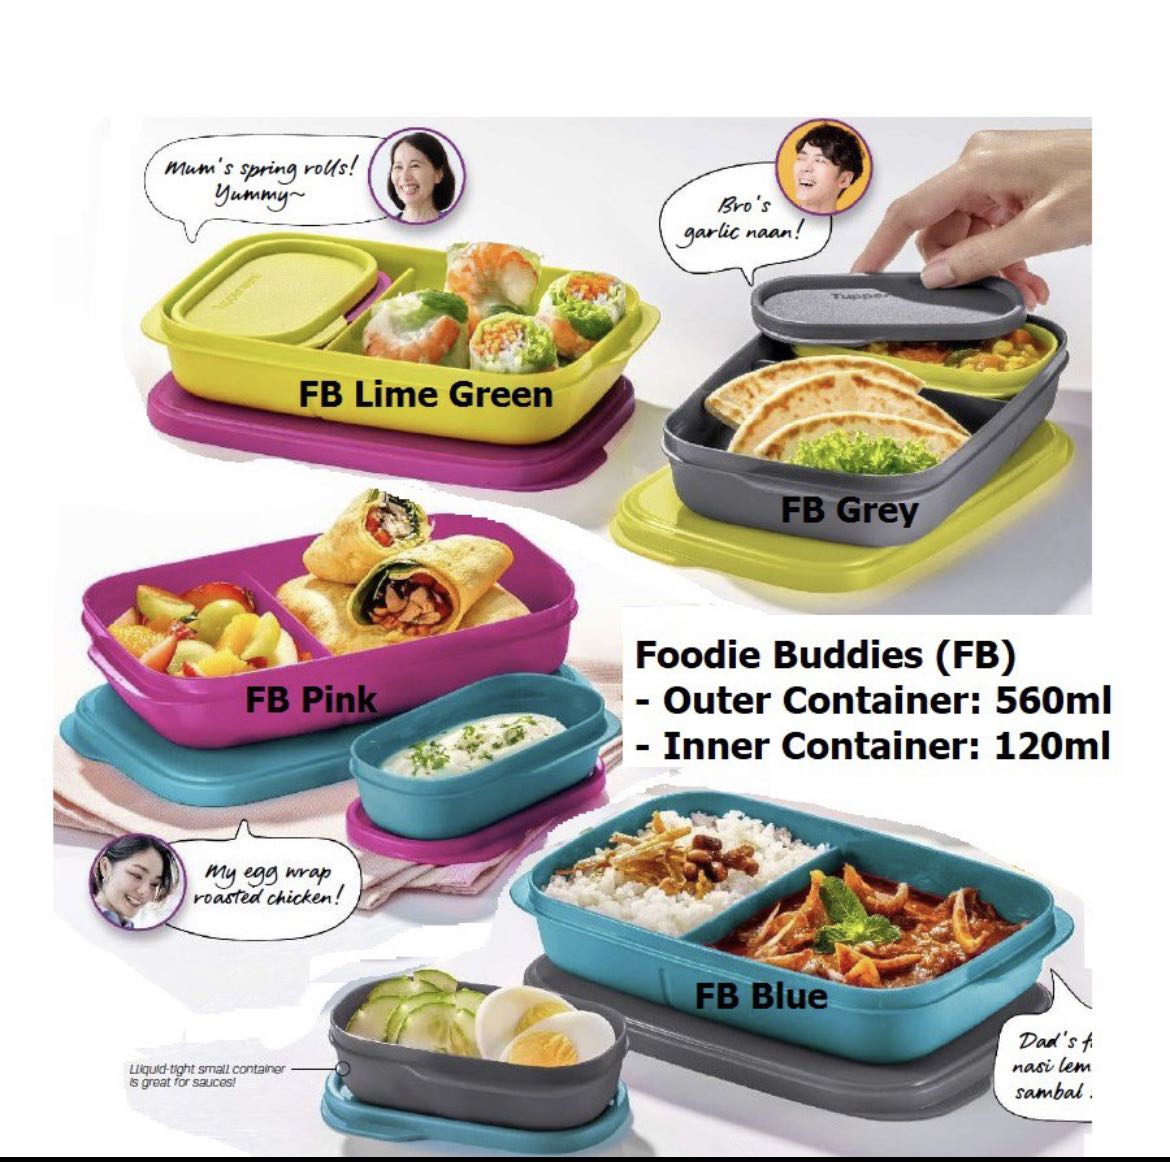 https://media.karousell.com/media/photos/products/2022/1/7/tupperware_foodie_buddy_lunch__1641522843_ce0efeb3.jpg